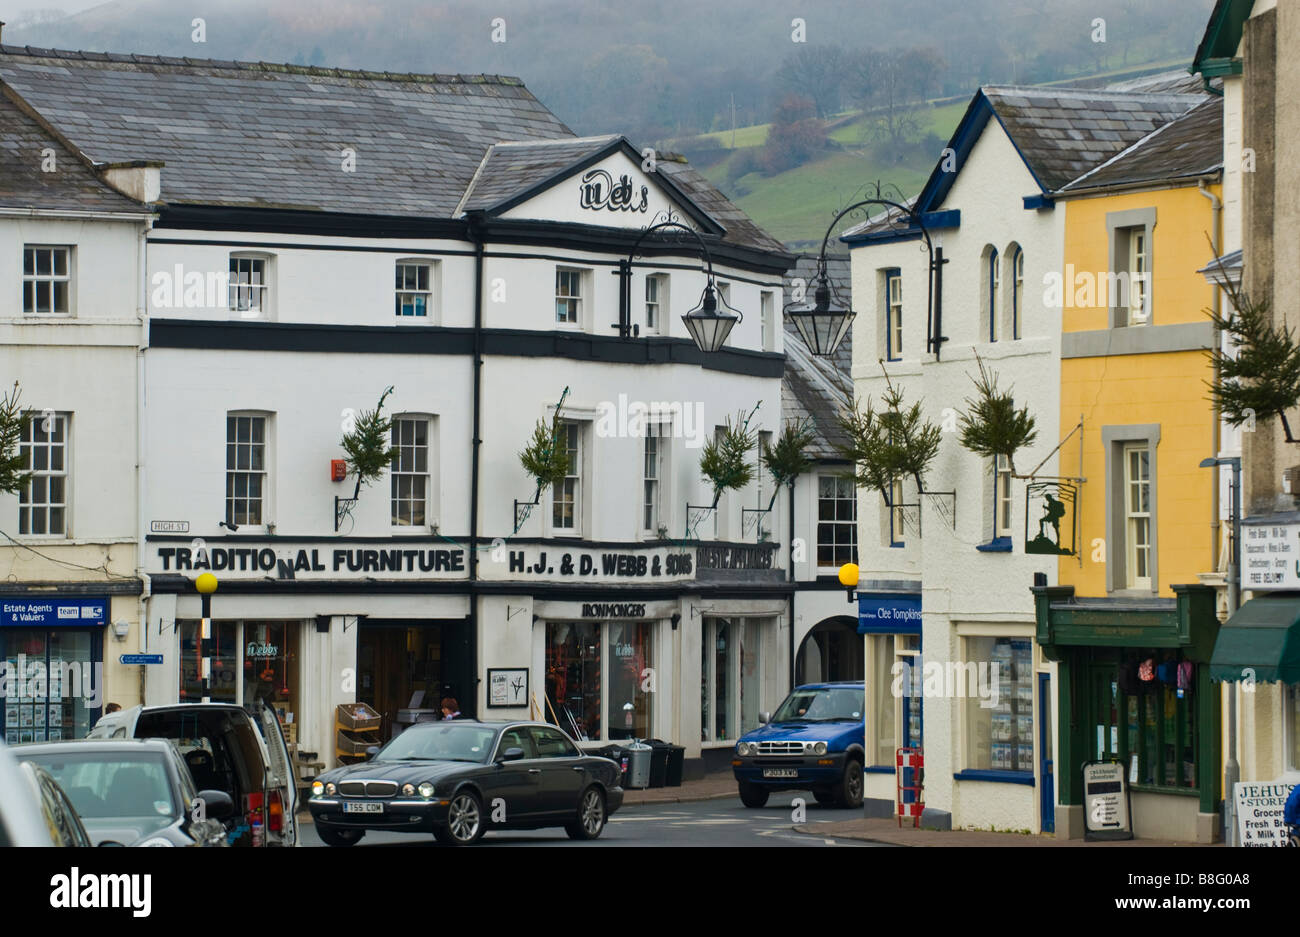 Town centre of Crickhowell Powys Wales UK Stock Photo